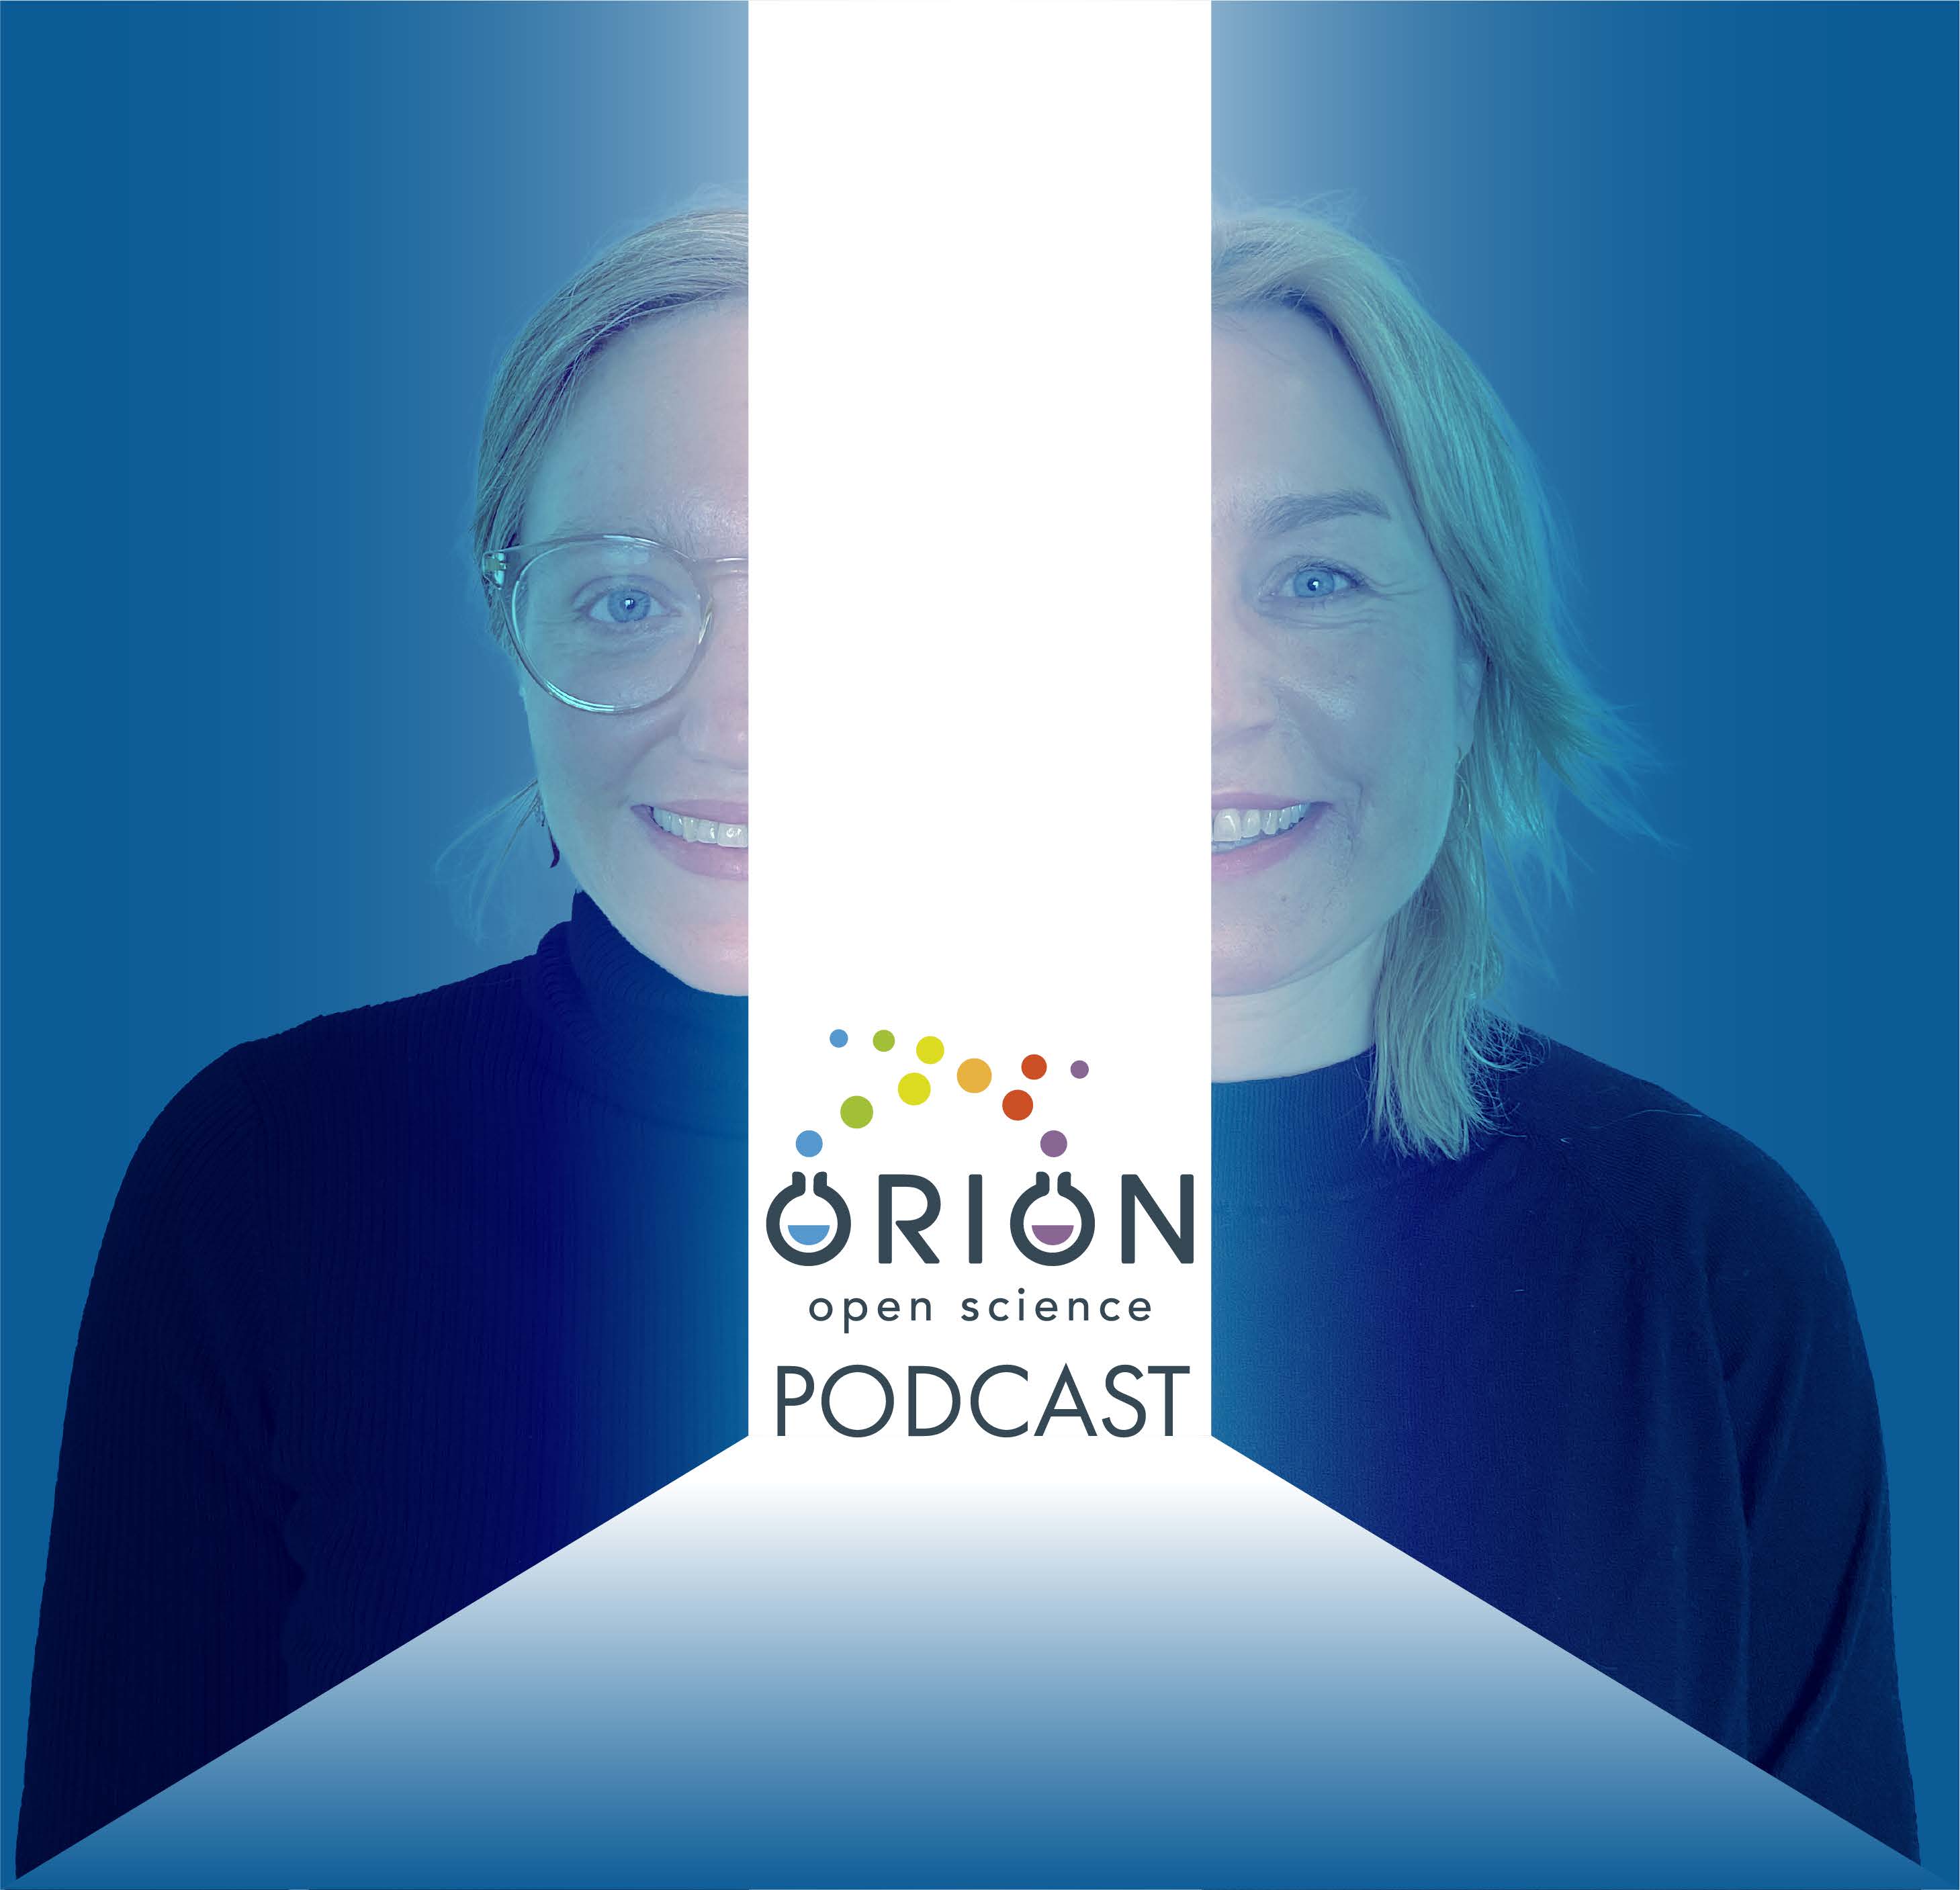 The ORION Open Science Podcast